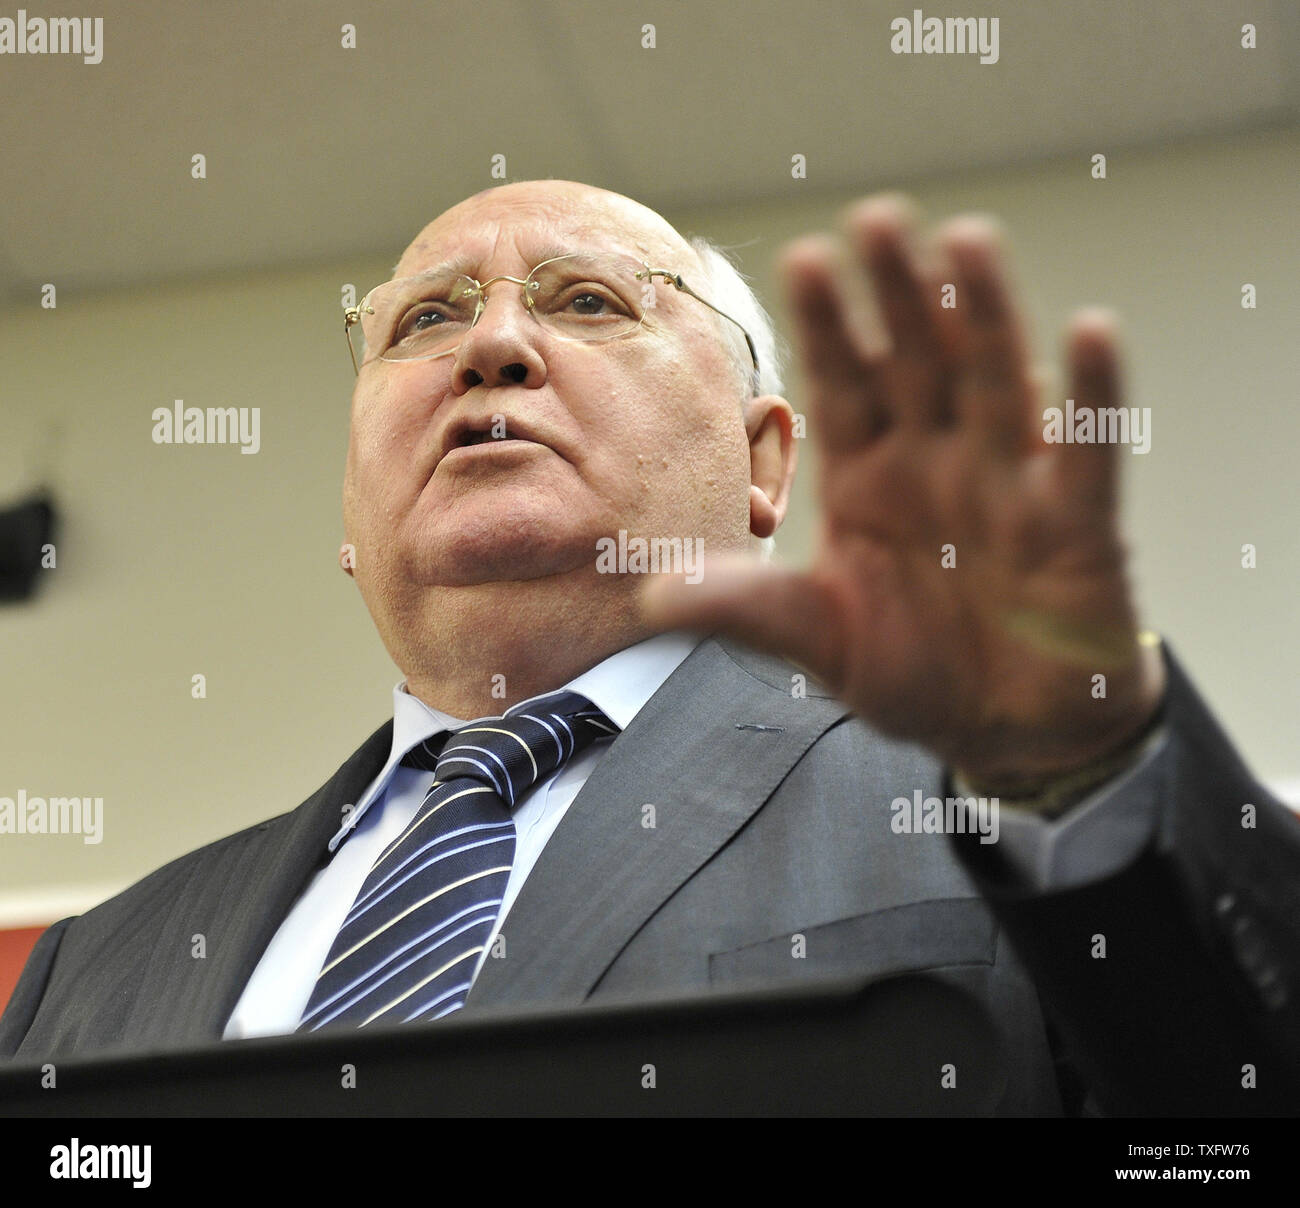 Former Soviet President Mikhail Gorbachev speaks to students at Frederick  Von Steuben Metropolitan Science Center as part of the 12th World Summit of Nobel  Peace Laureates on April 23, 2012 in Chicago.